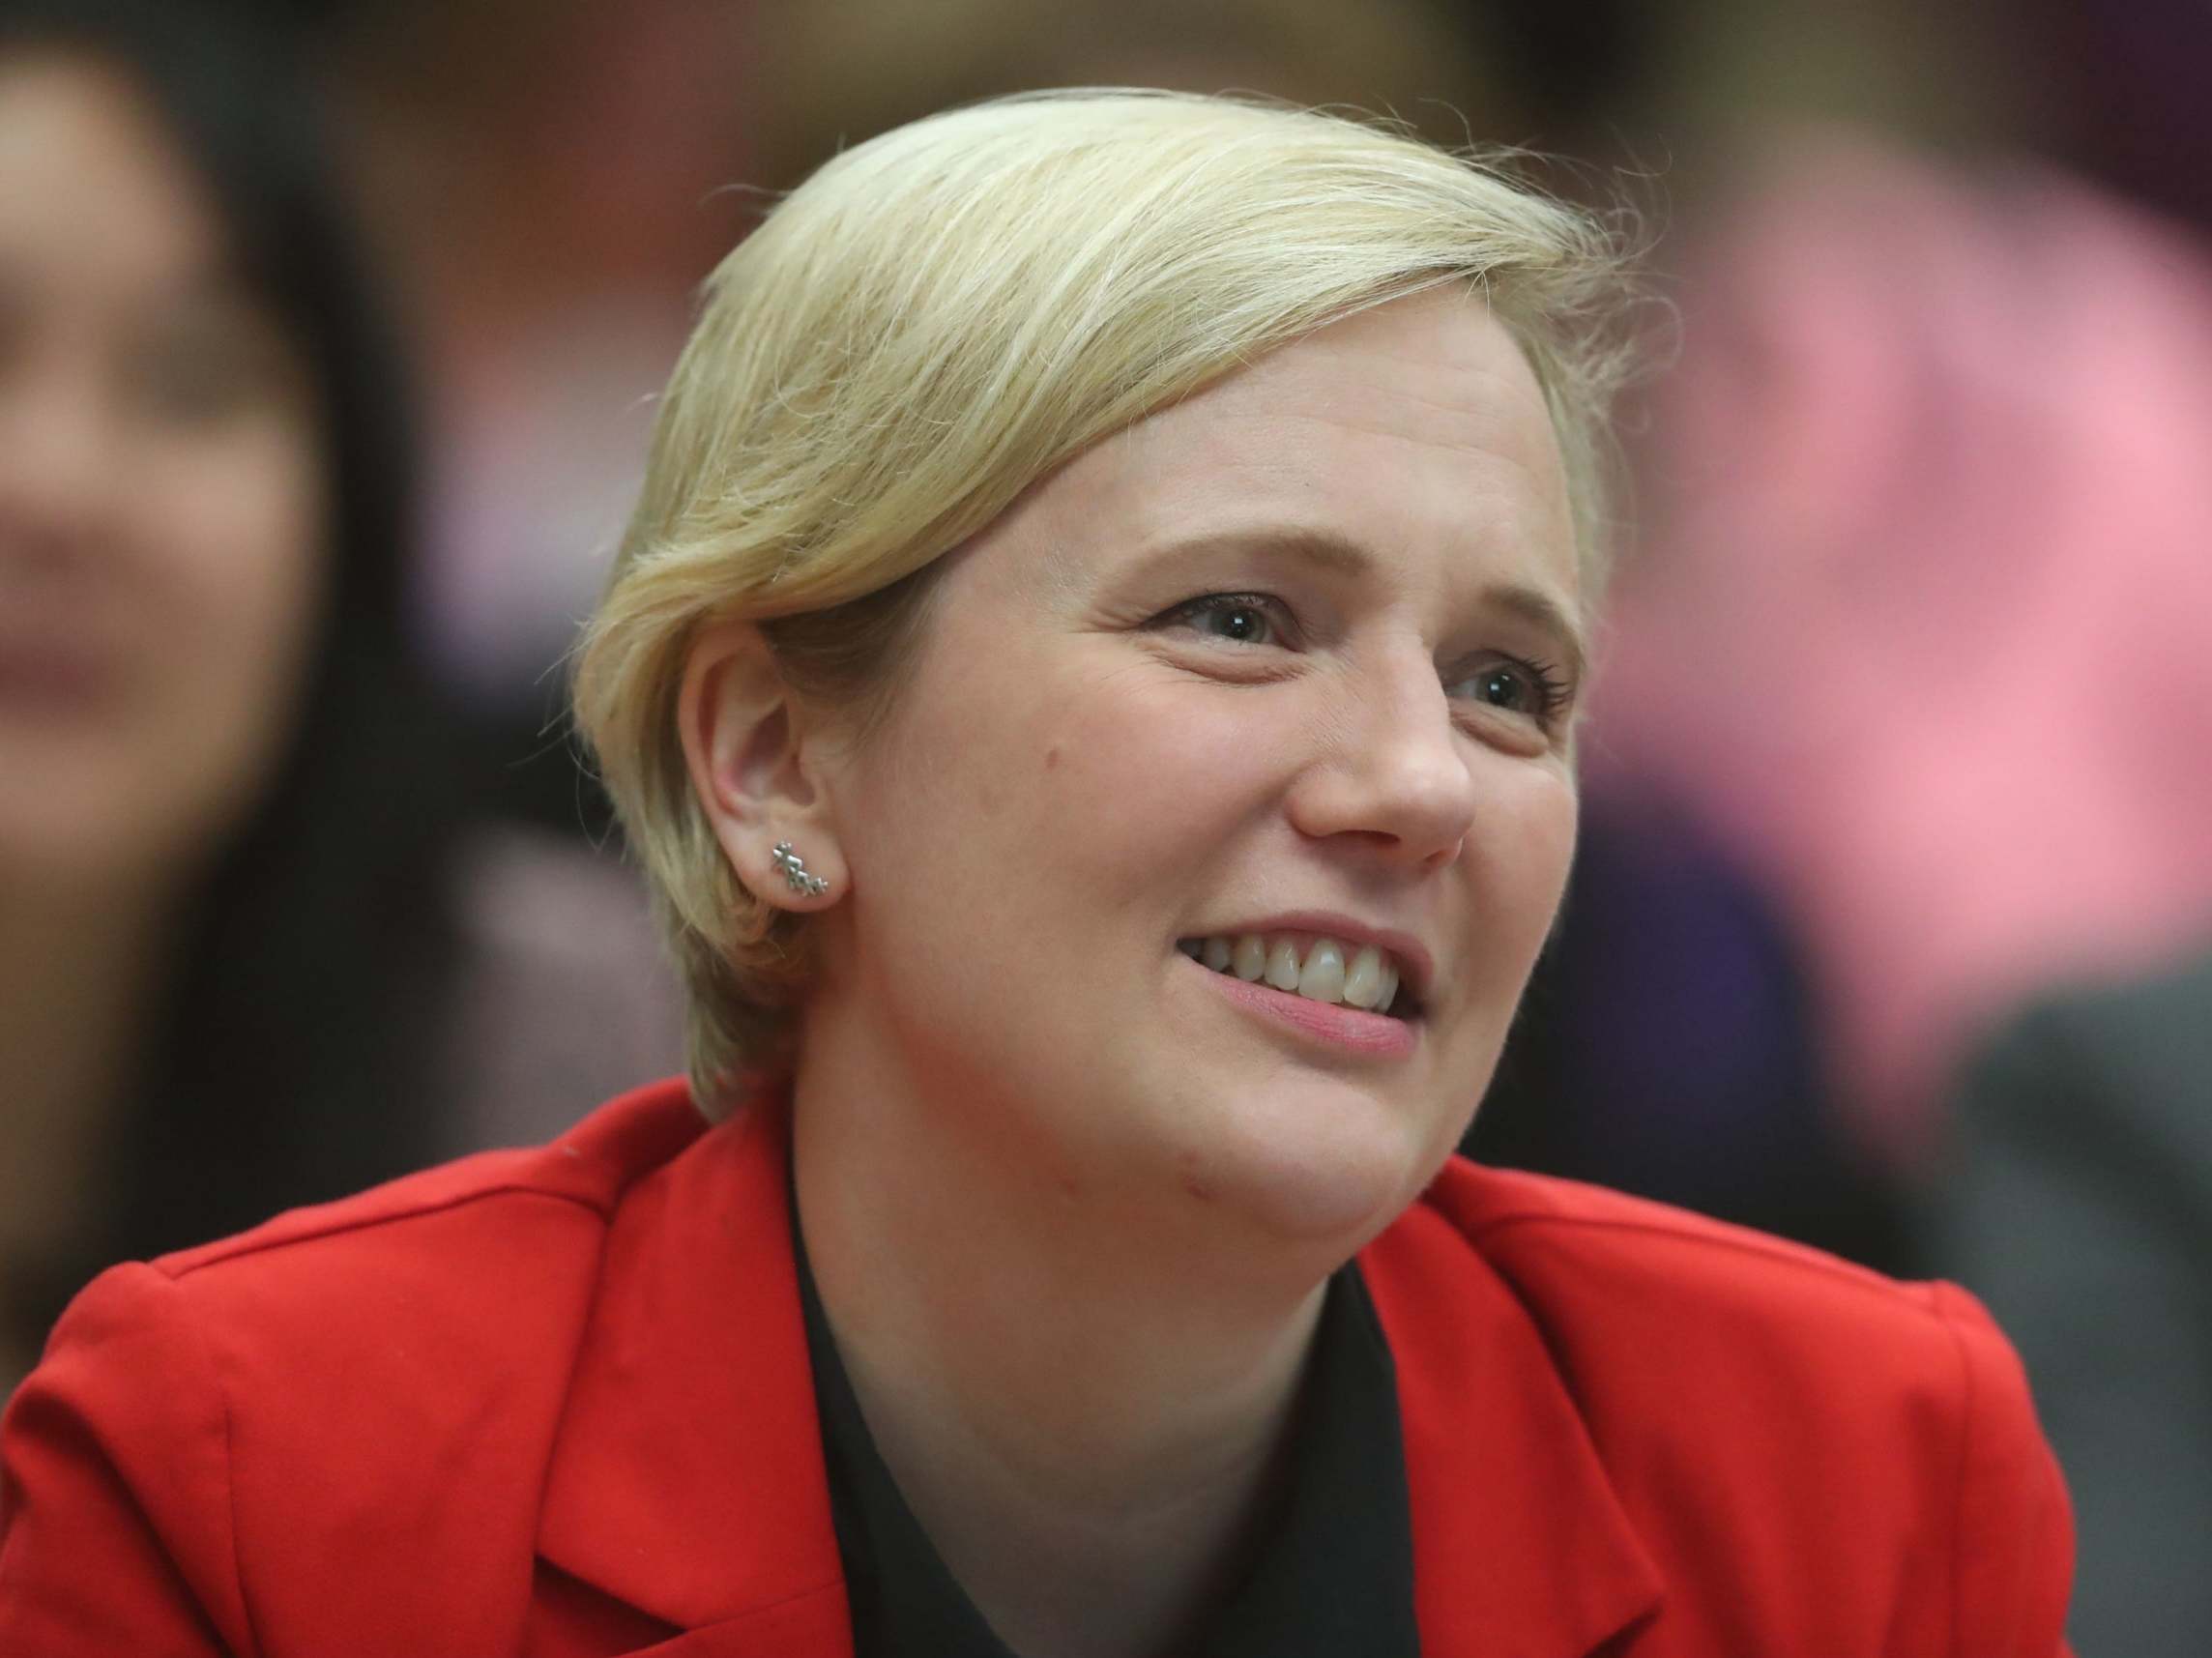 Stella Creasy said she had to choose between ‘being an MP and being a mum’ over parliament’s current rules